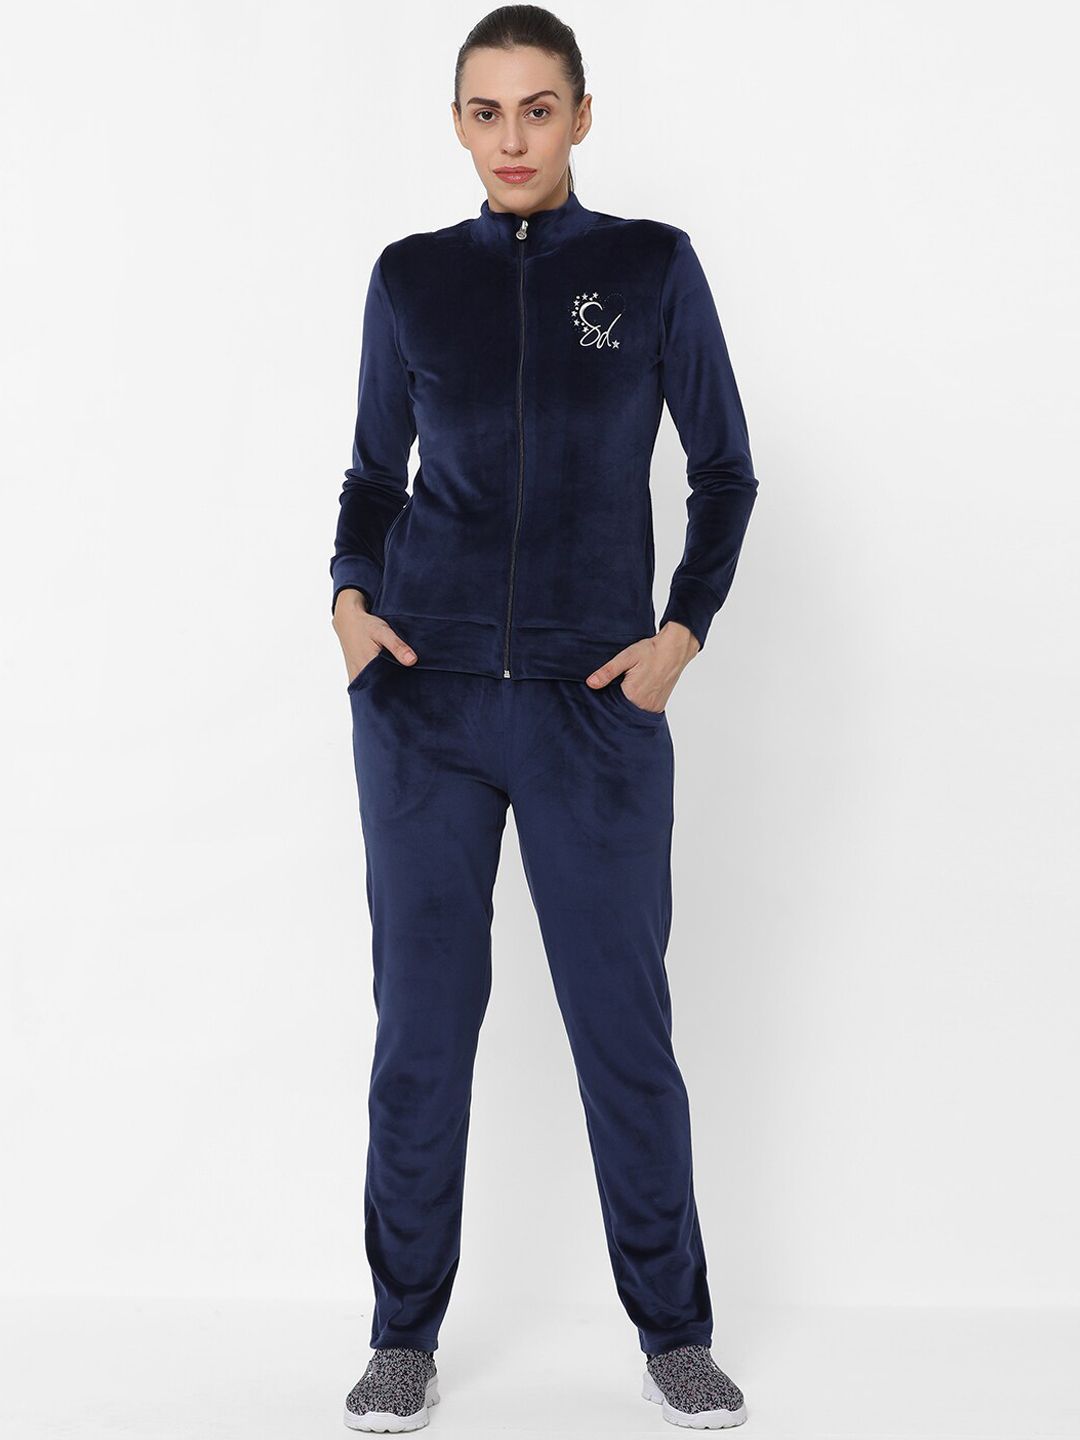 Sweet Dreams Women Navy Blue Solid Track Suit Price in India